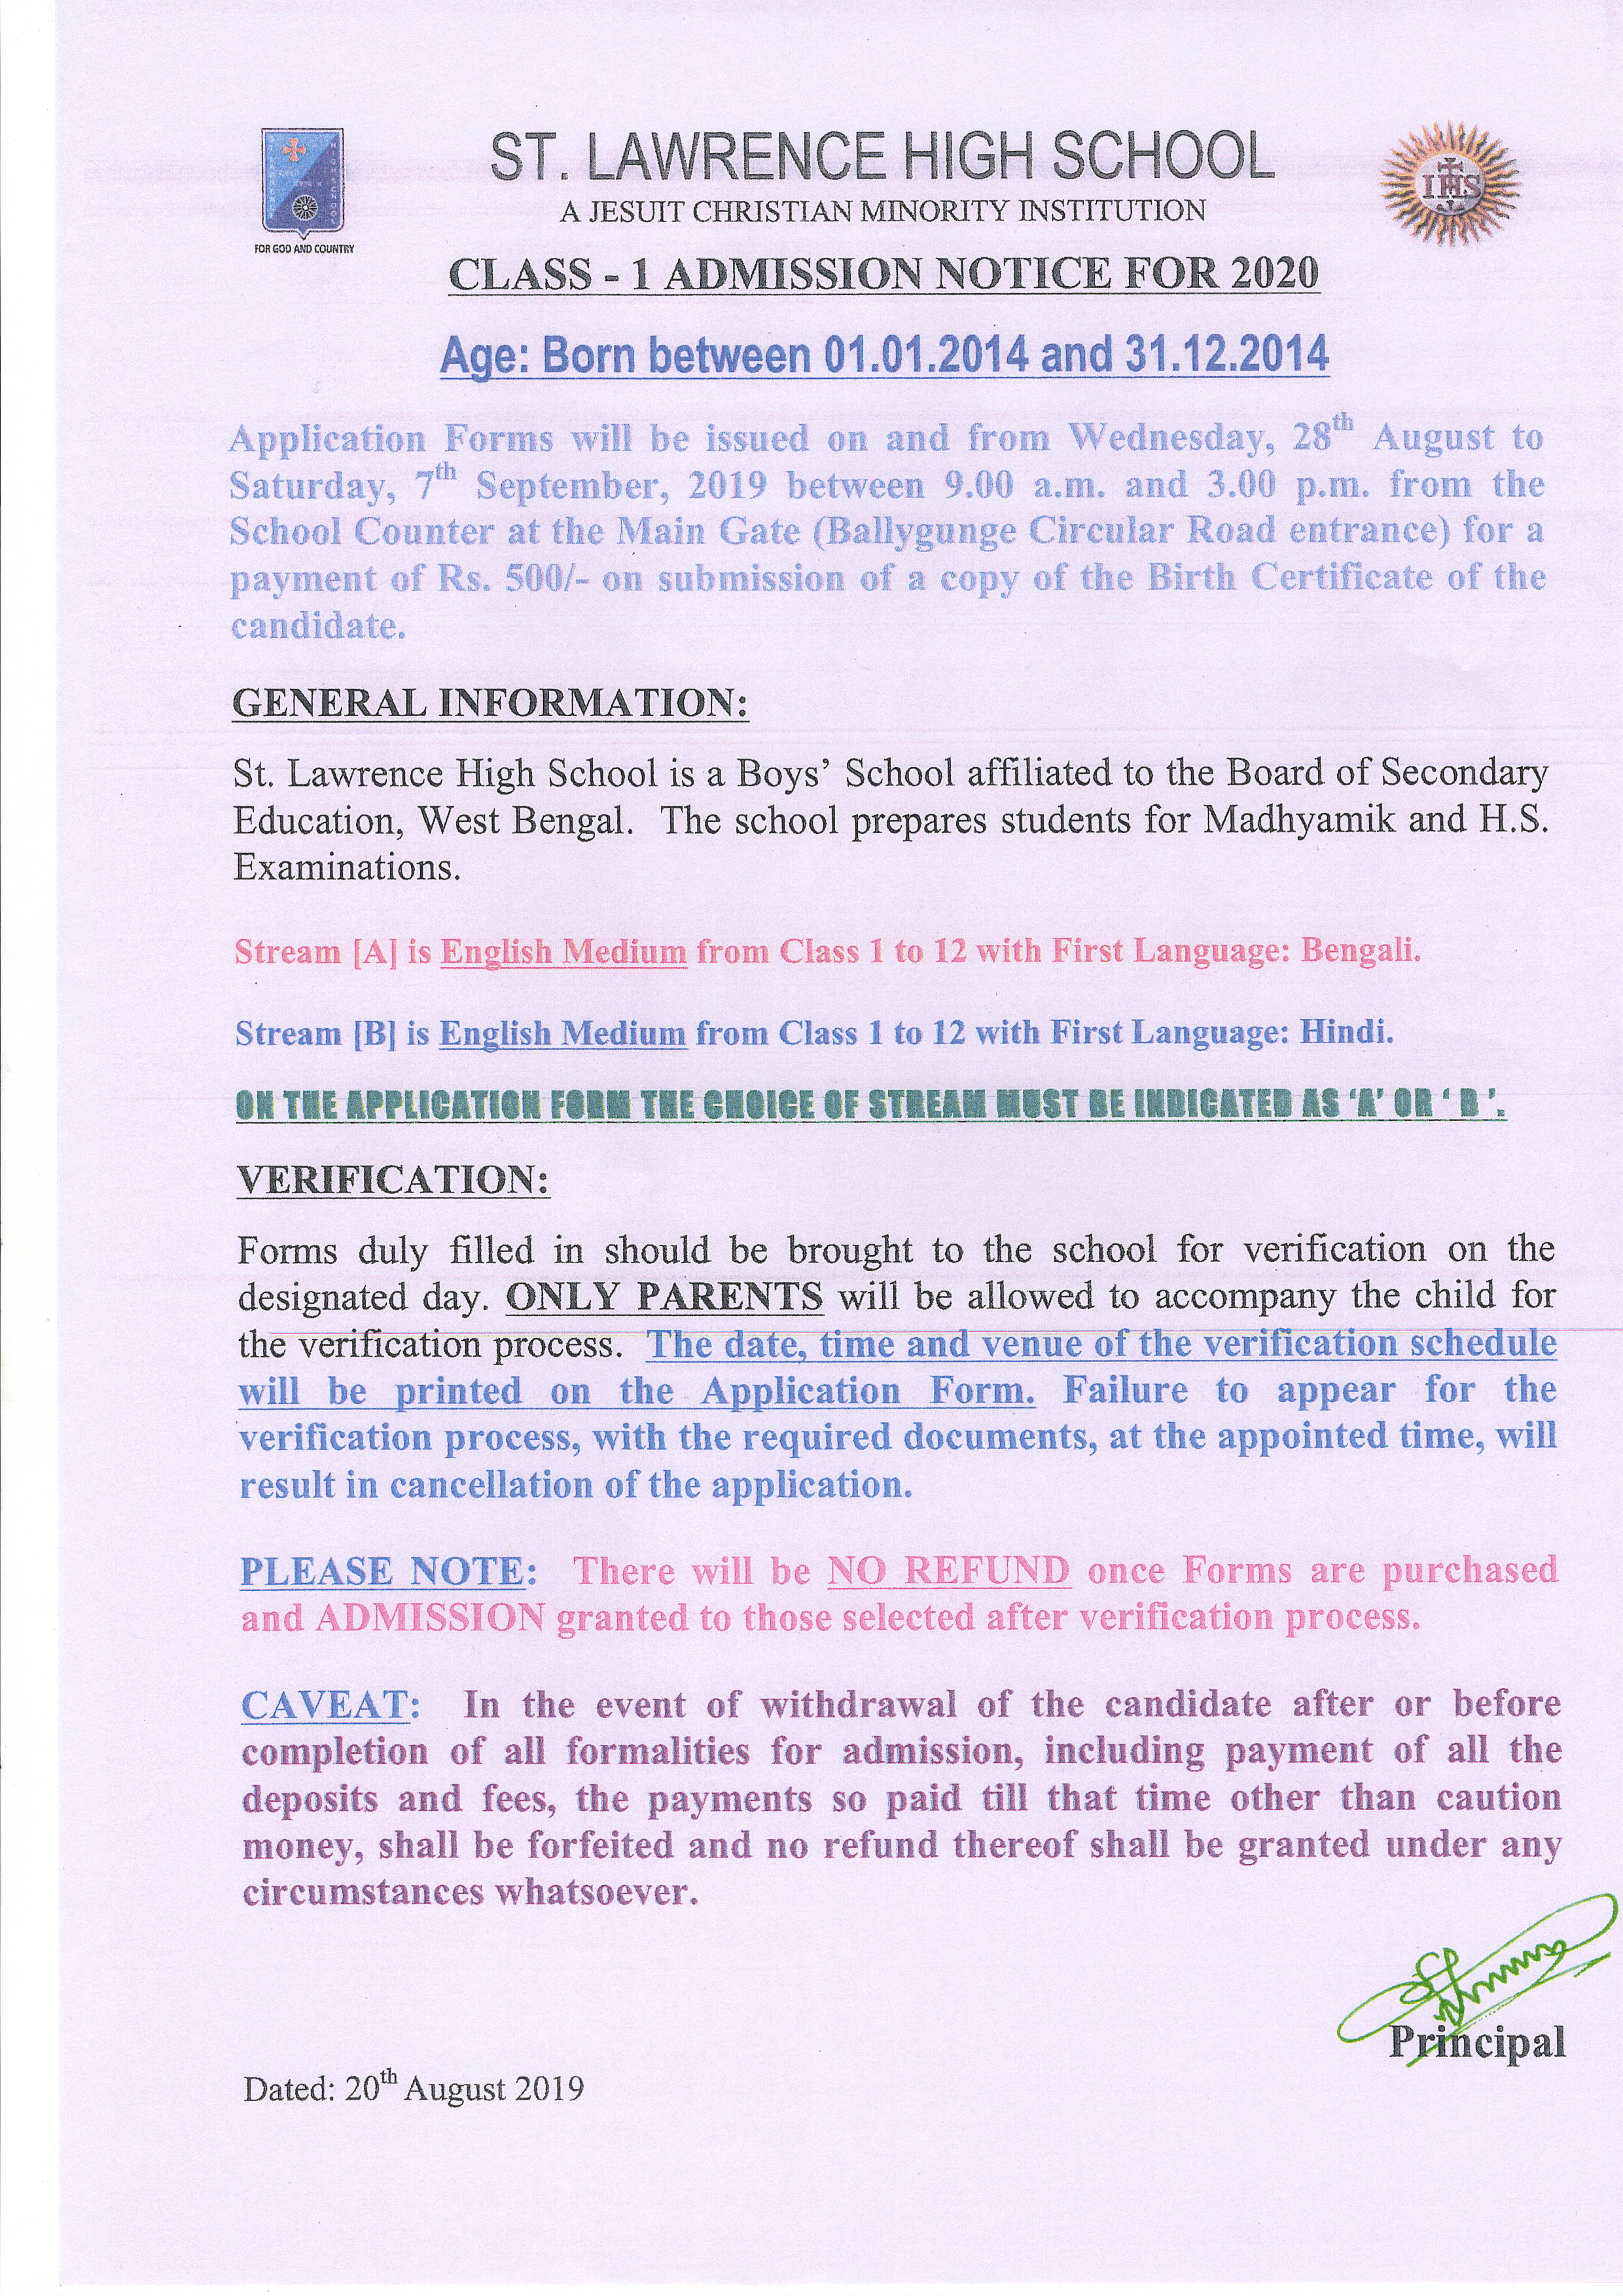 NOTICE FOR CLASS 1 ADMISSION - 2020